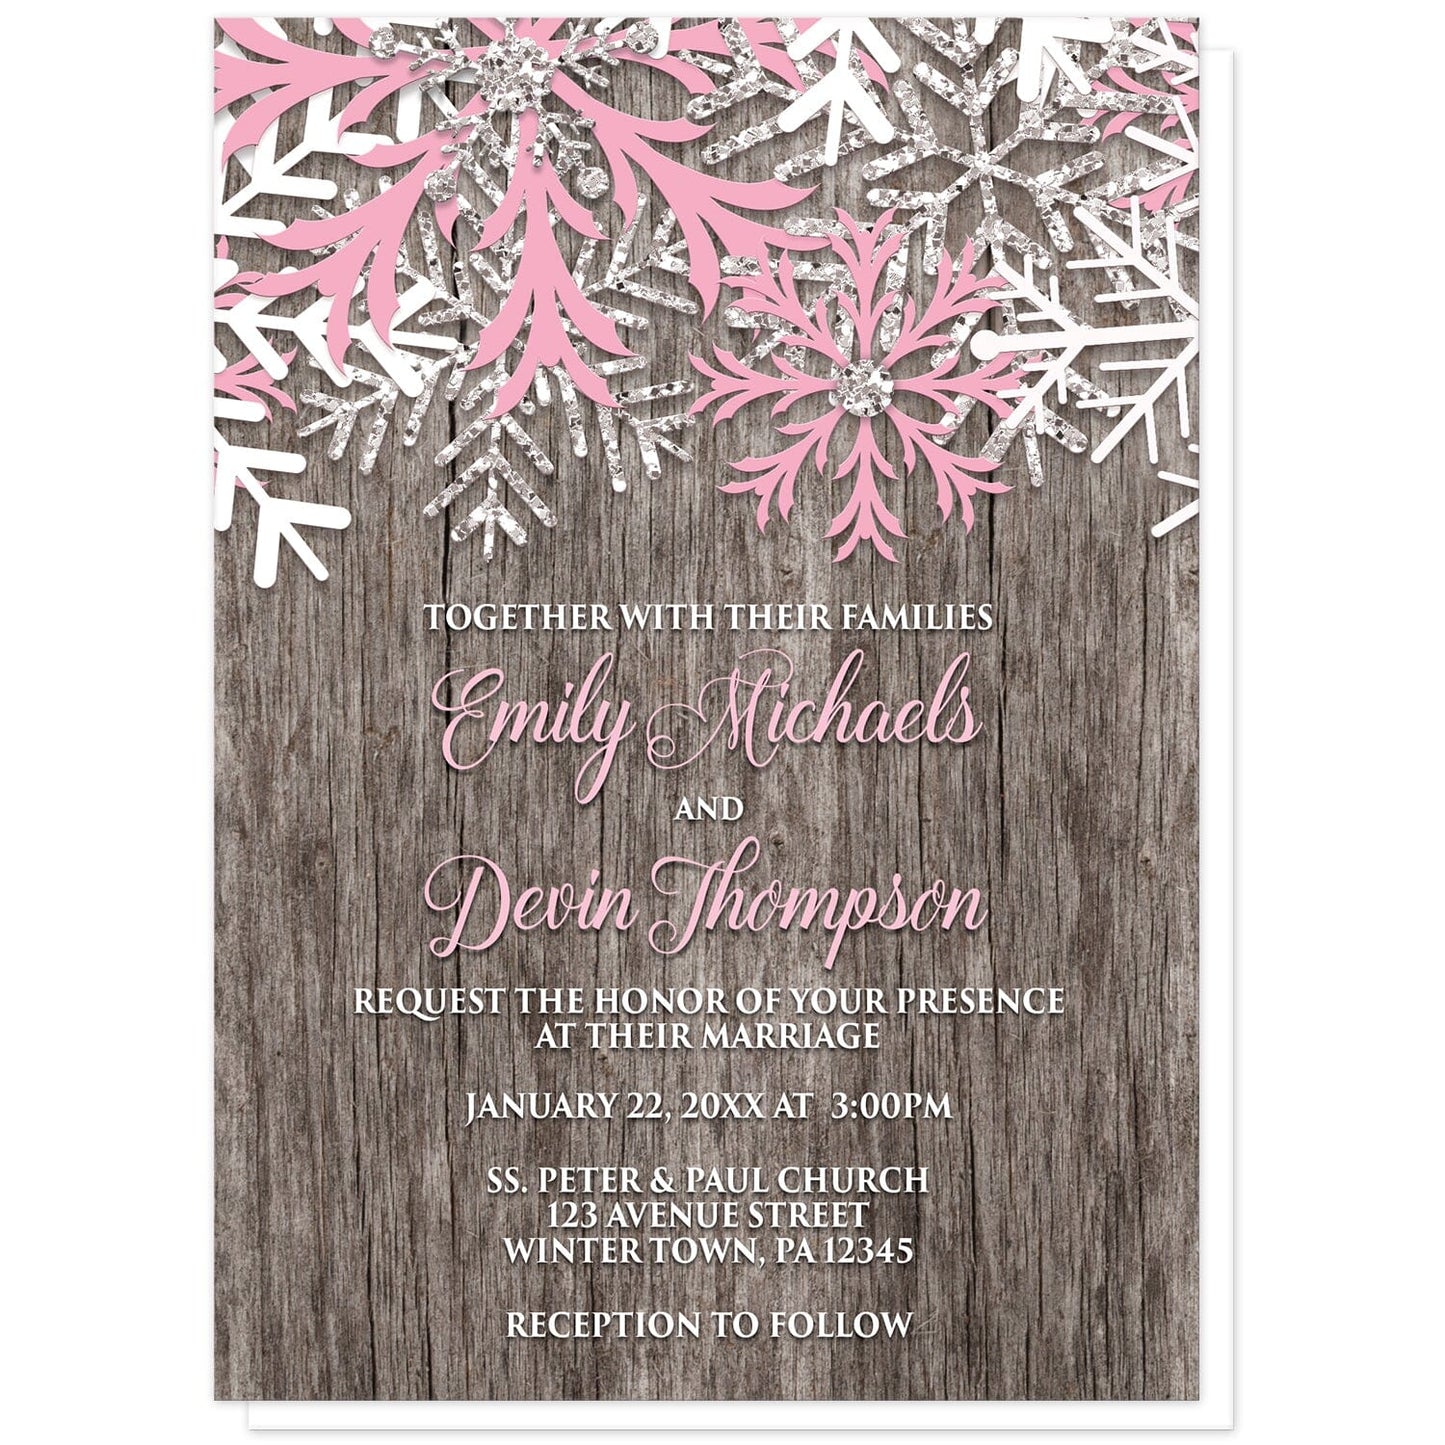 Rustic Winter Wood Pink Snowflake Wedding Invitations at Artistically Invited. Country-inspired rustic winter wood pink snowflake wedding invitations designed with pink, white, and silver-colored glitter-illustrated snowflakes along the top over a rustic wood pattern illustration. Your personalized marriage celebration details are custom printed in pink and white over the wood background below the snowflakes.